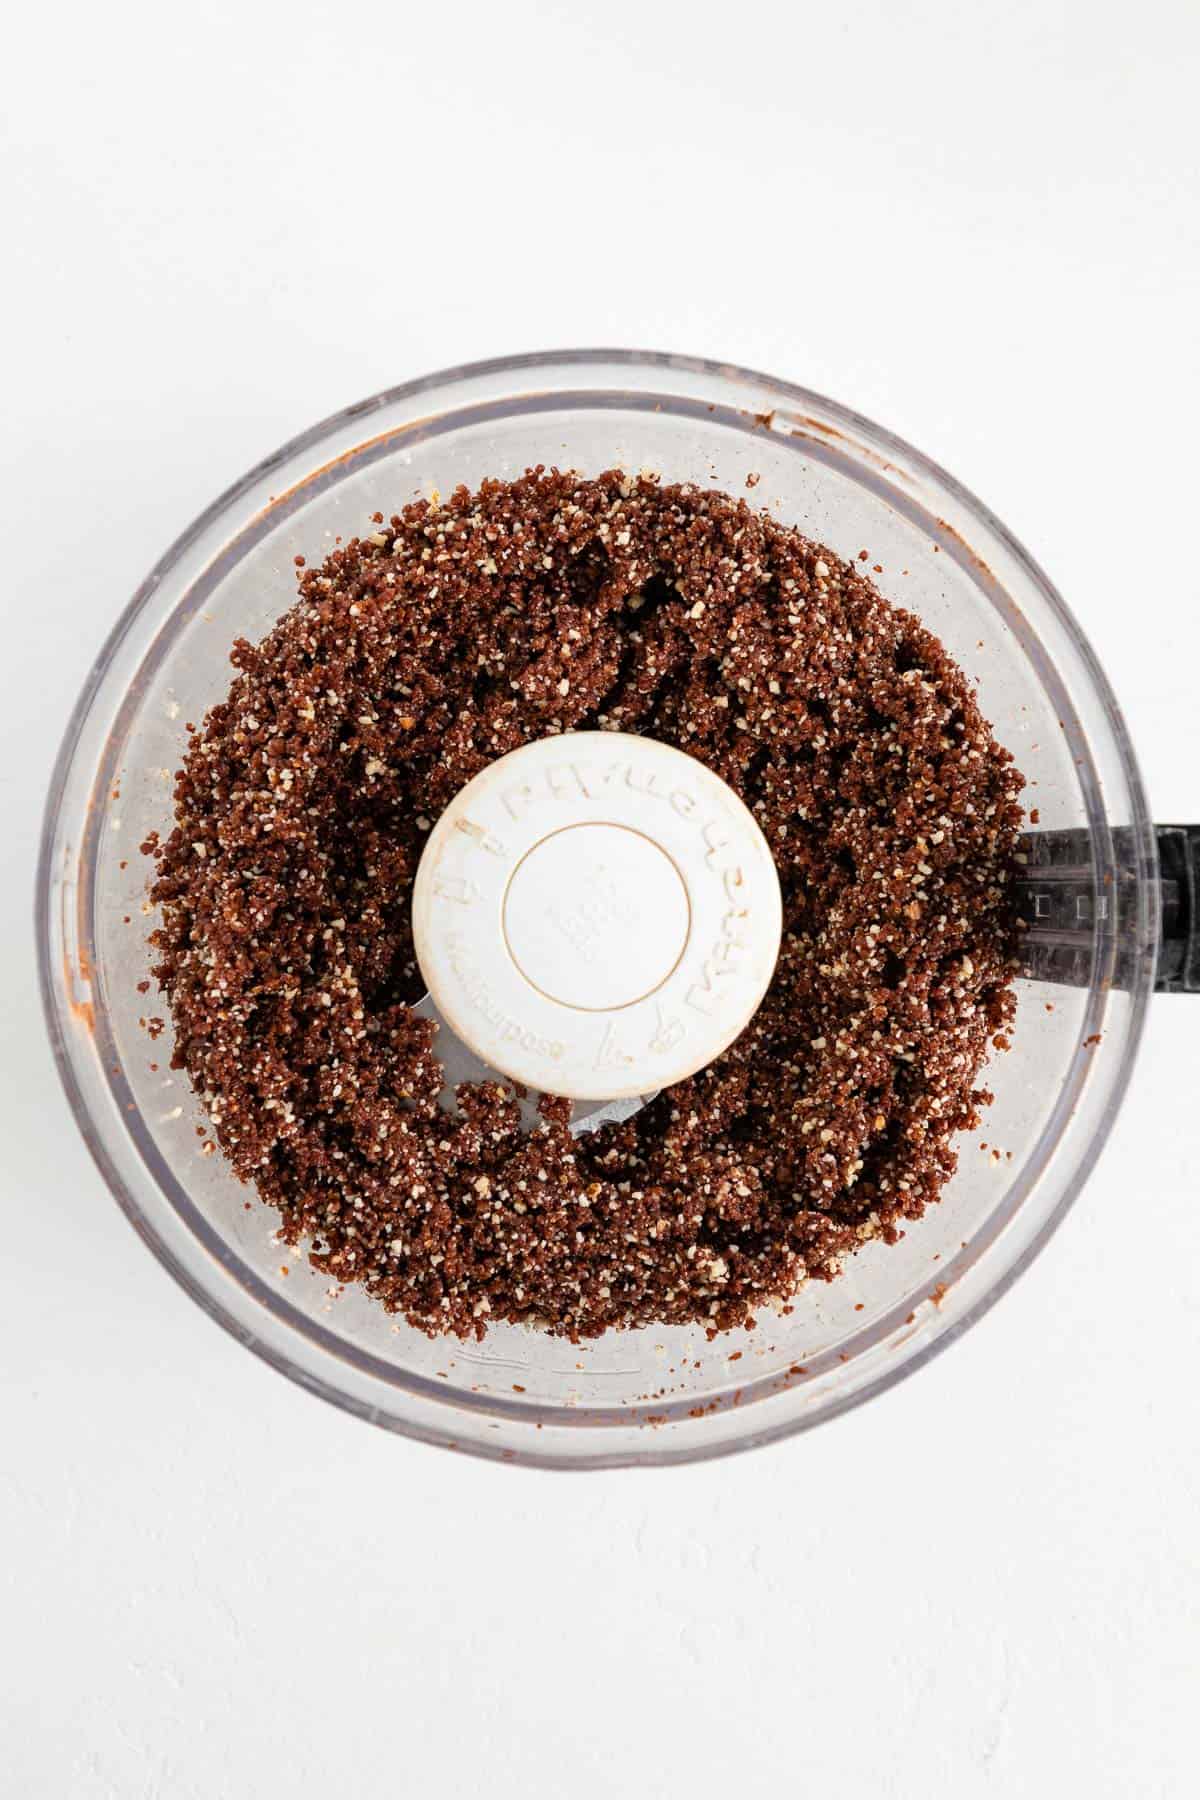 medjool dates, almonds, walnuts, and cocoa powder combined in a food processor